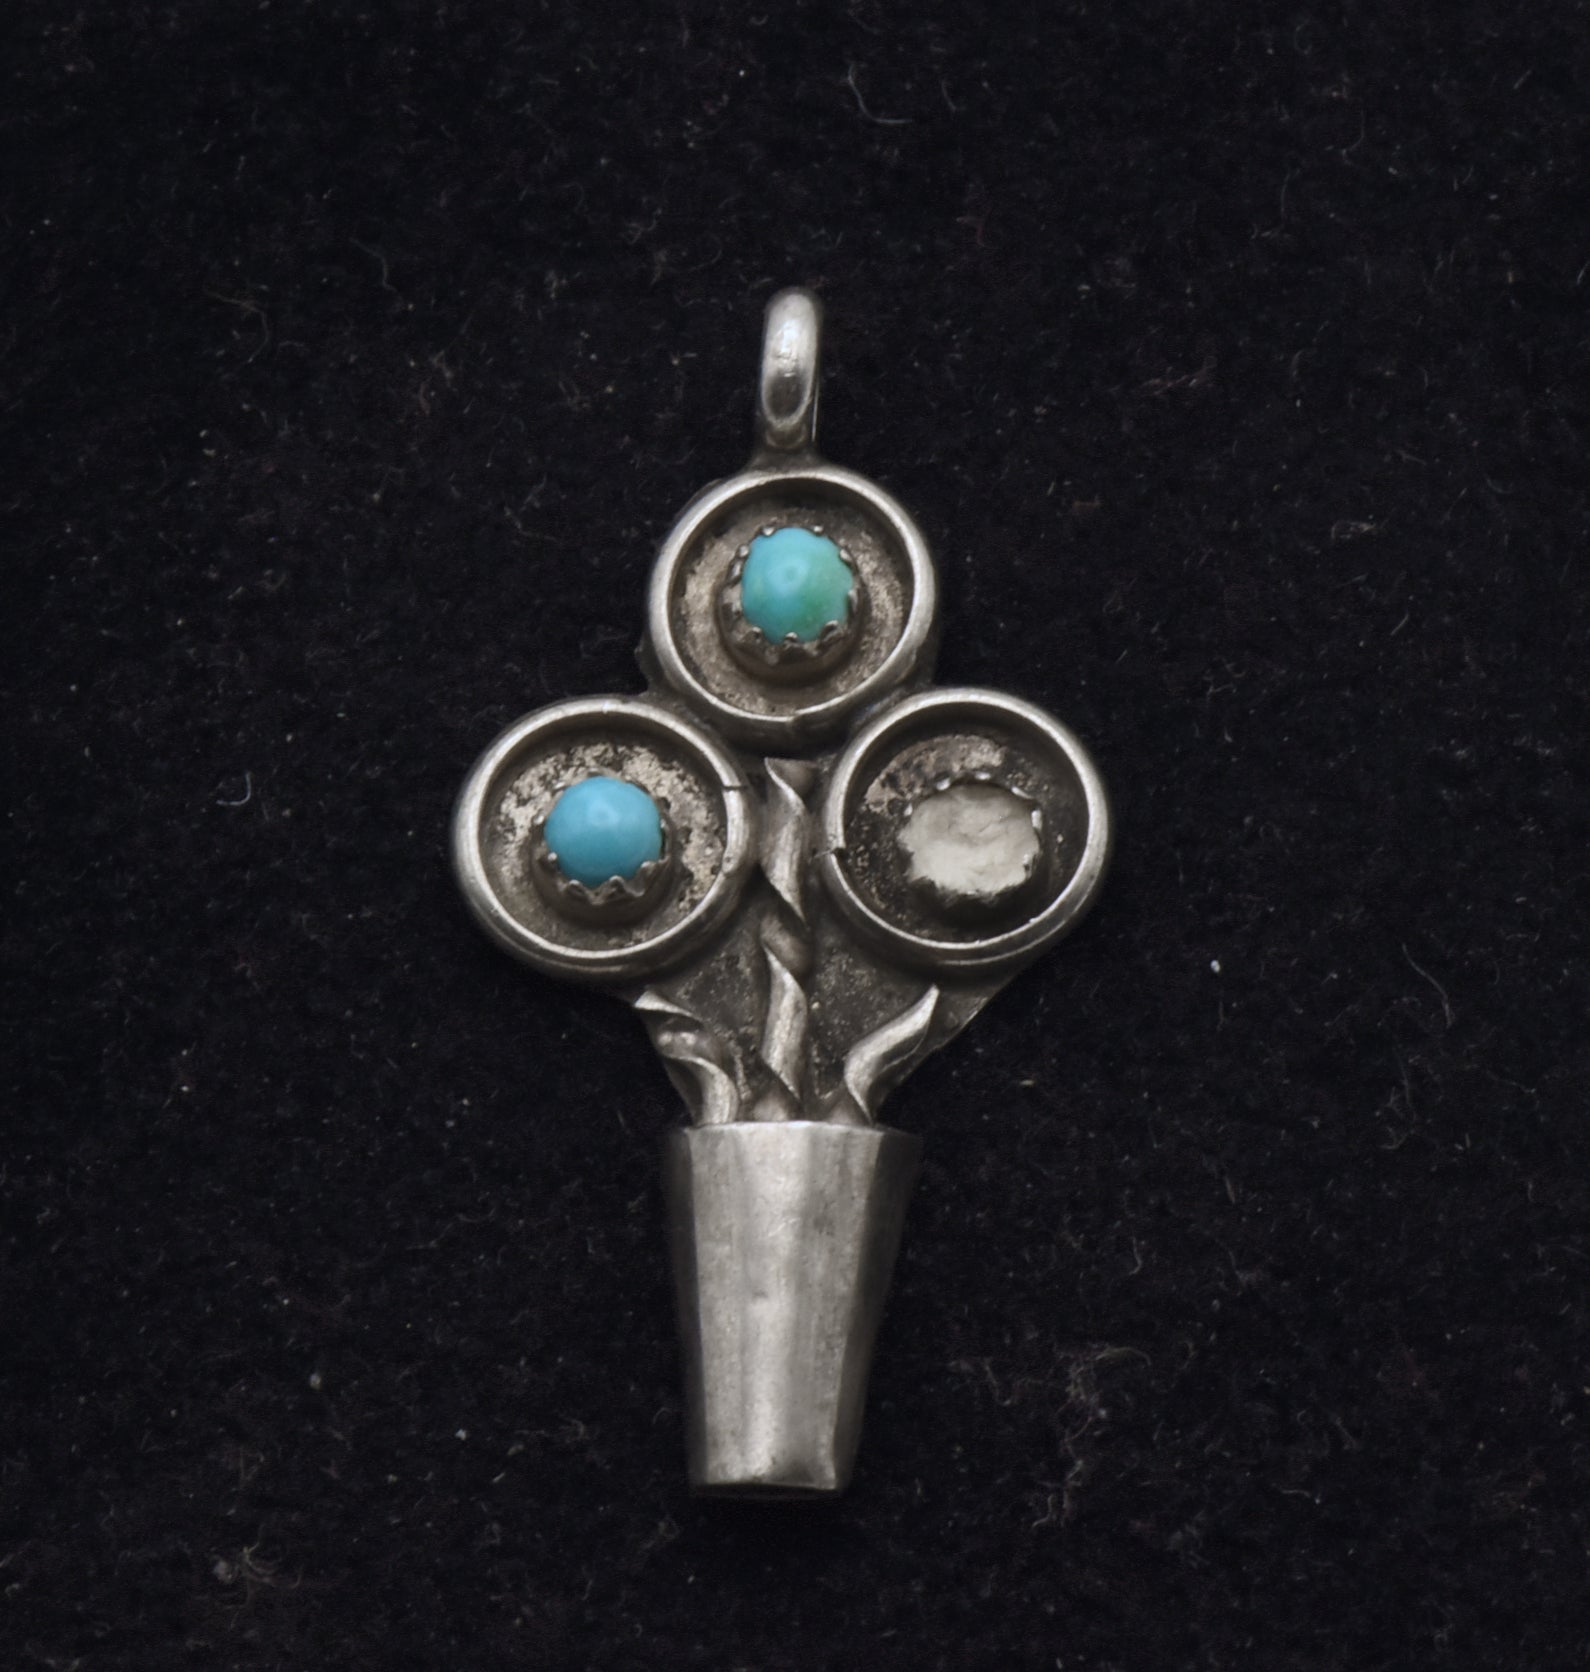 Vintage Handmade Sterling Silver and Turquoise Flower Pot Pendant - MISSING STONE